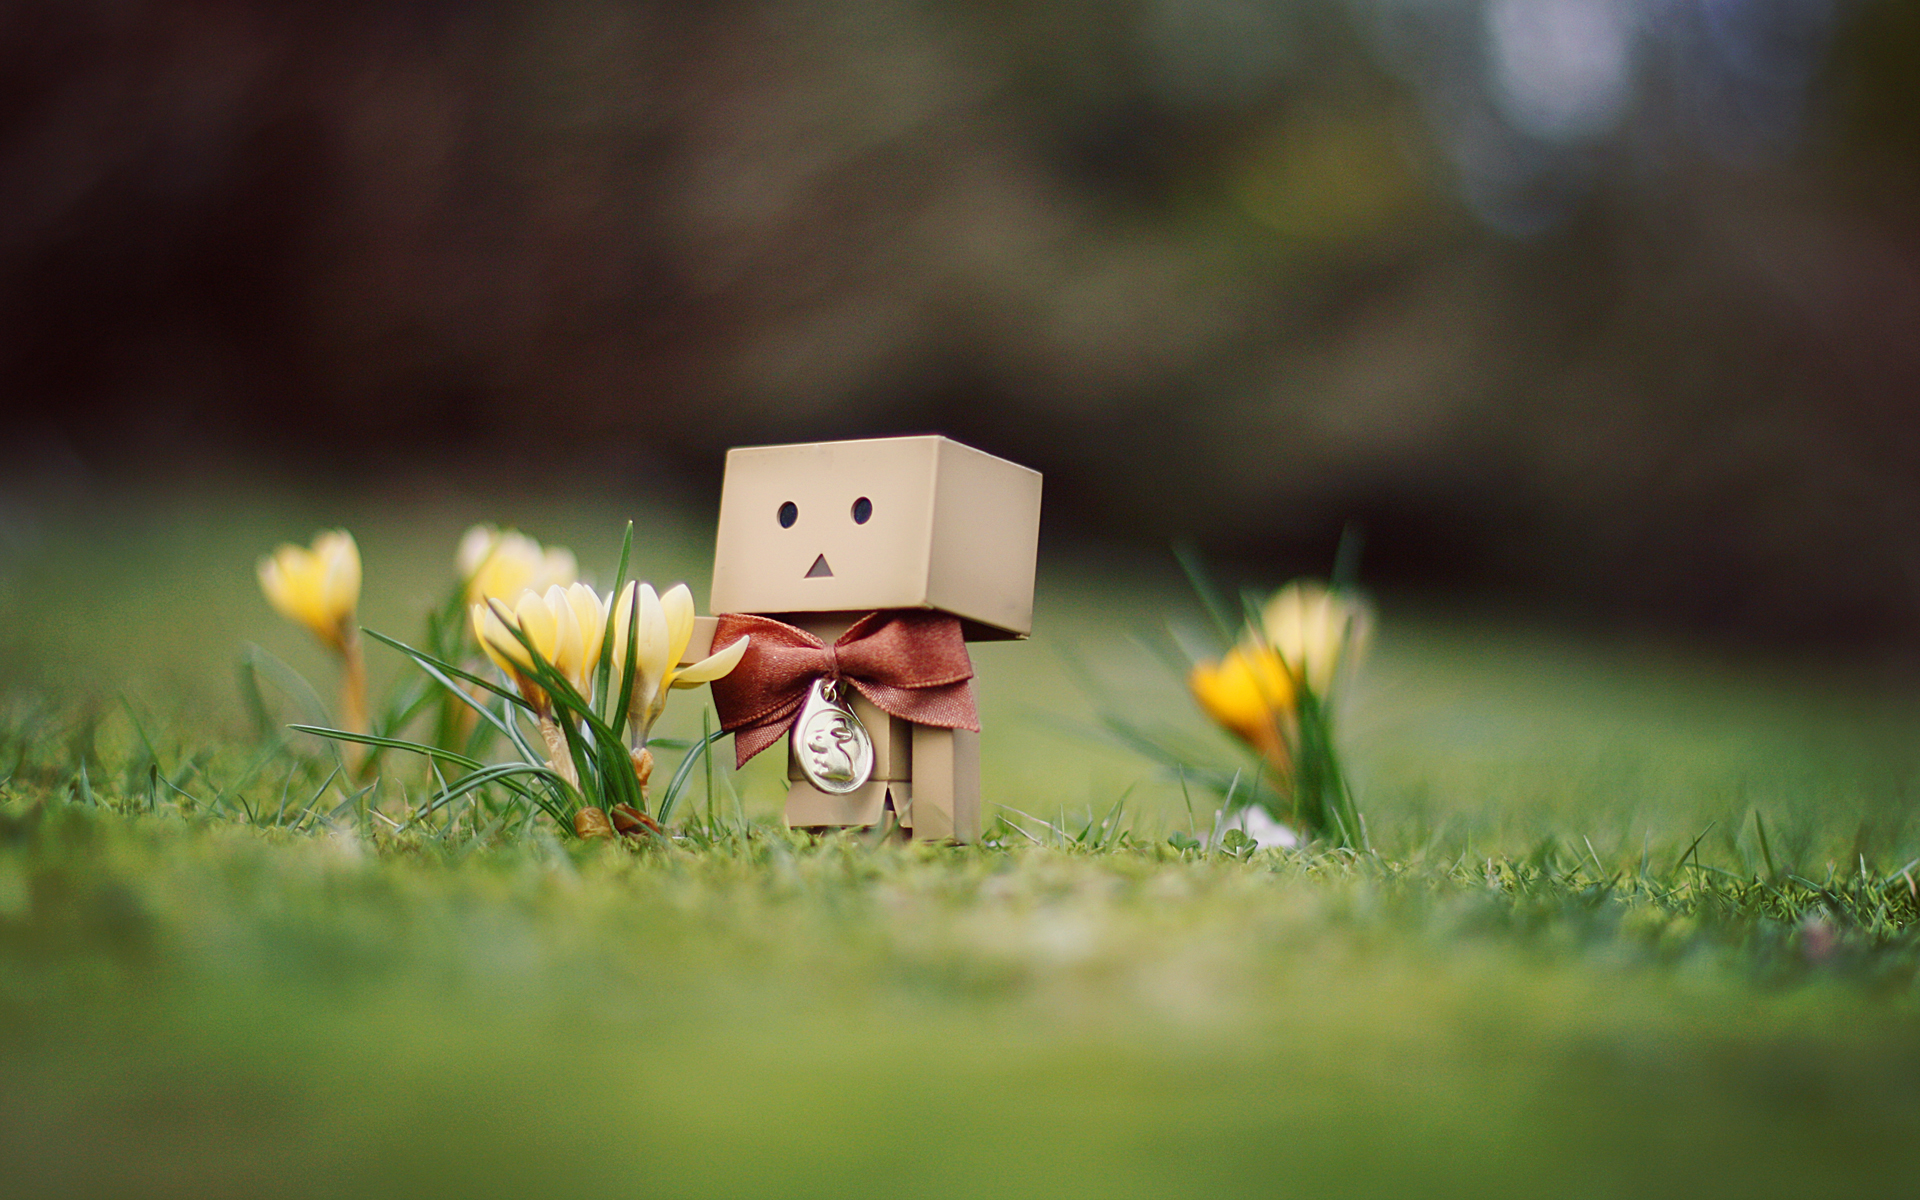 Danbo Toy HD Wallpaper 3d Amp Abstract